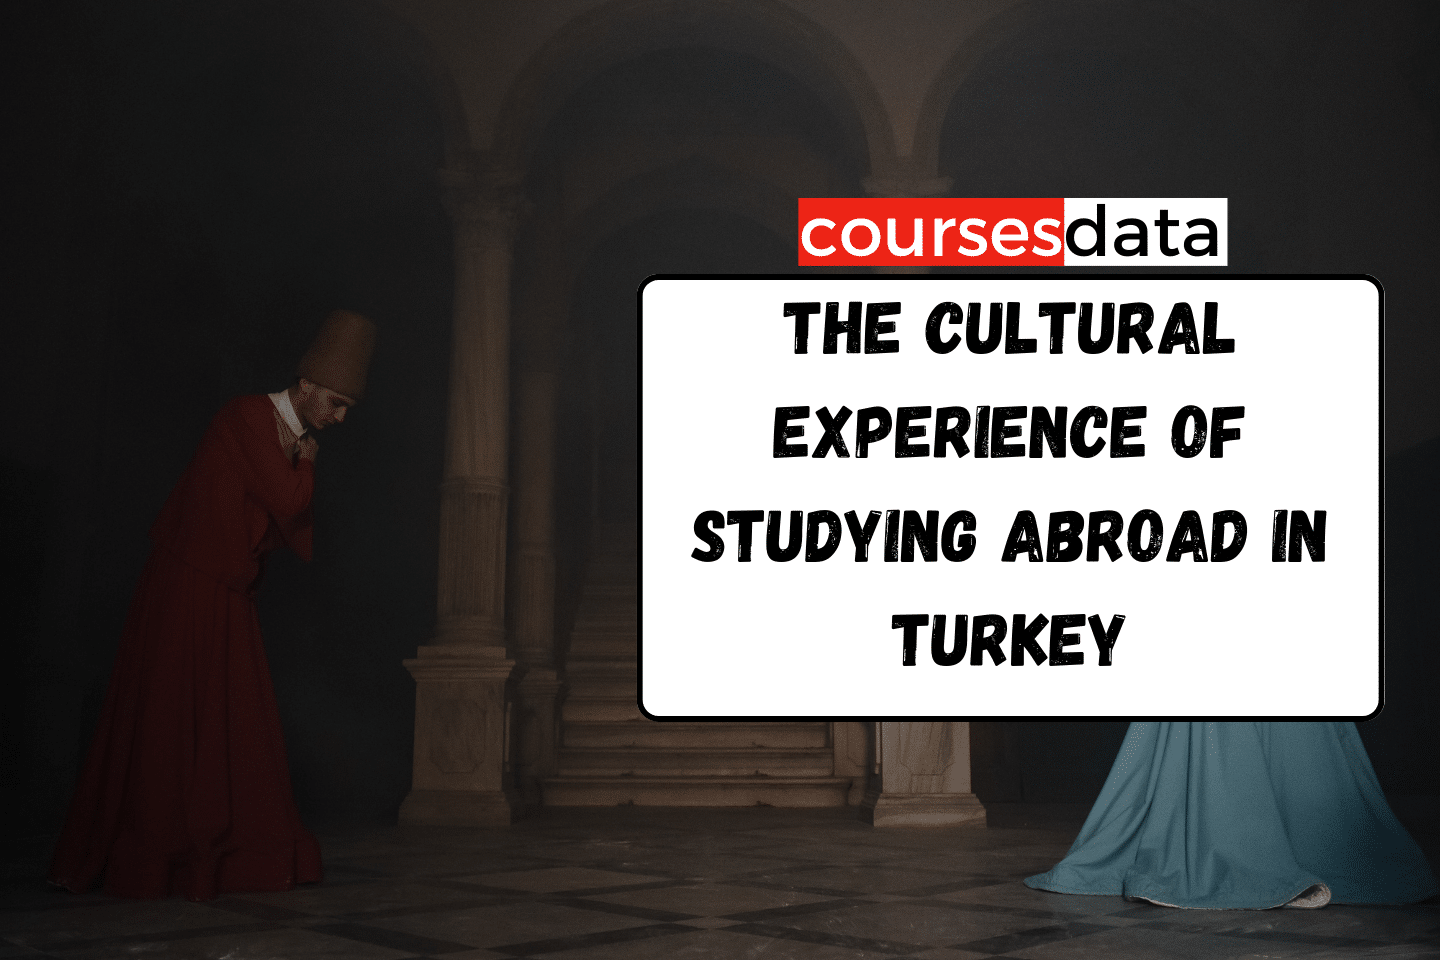 The Cultural Experience of Studying Abroad in Turkey